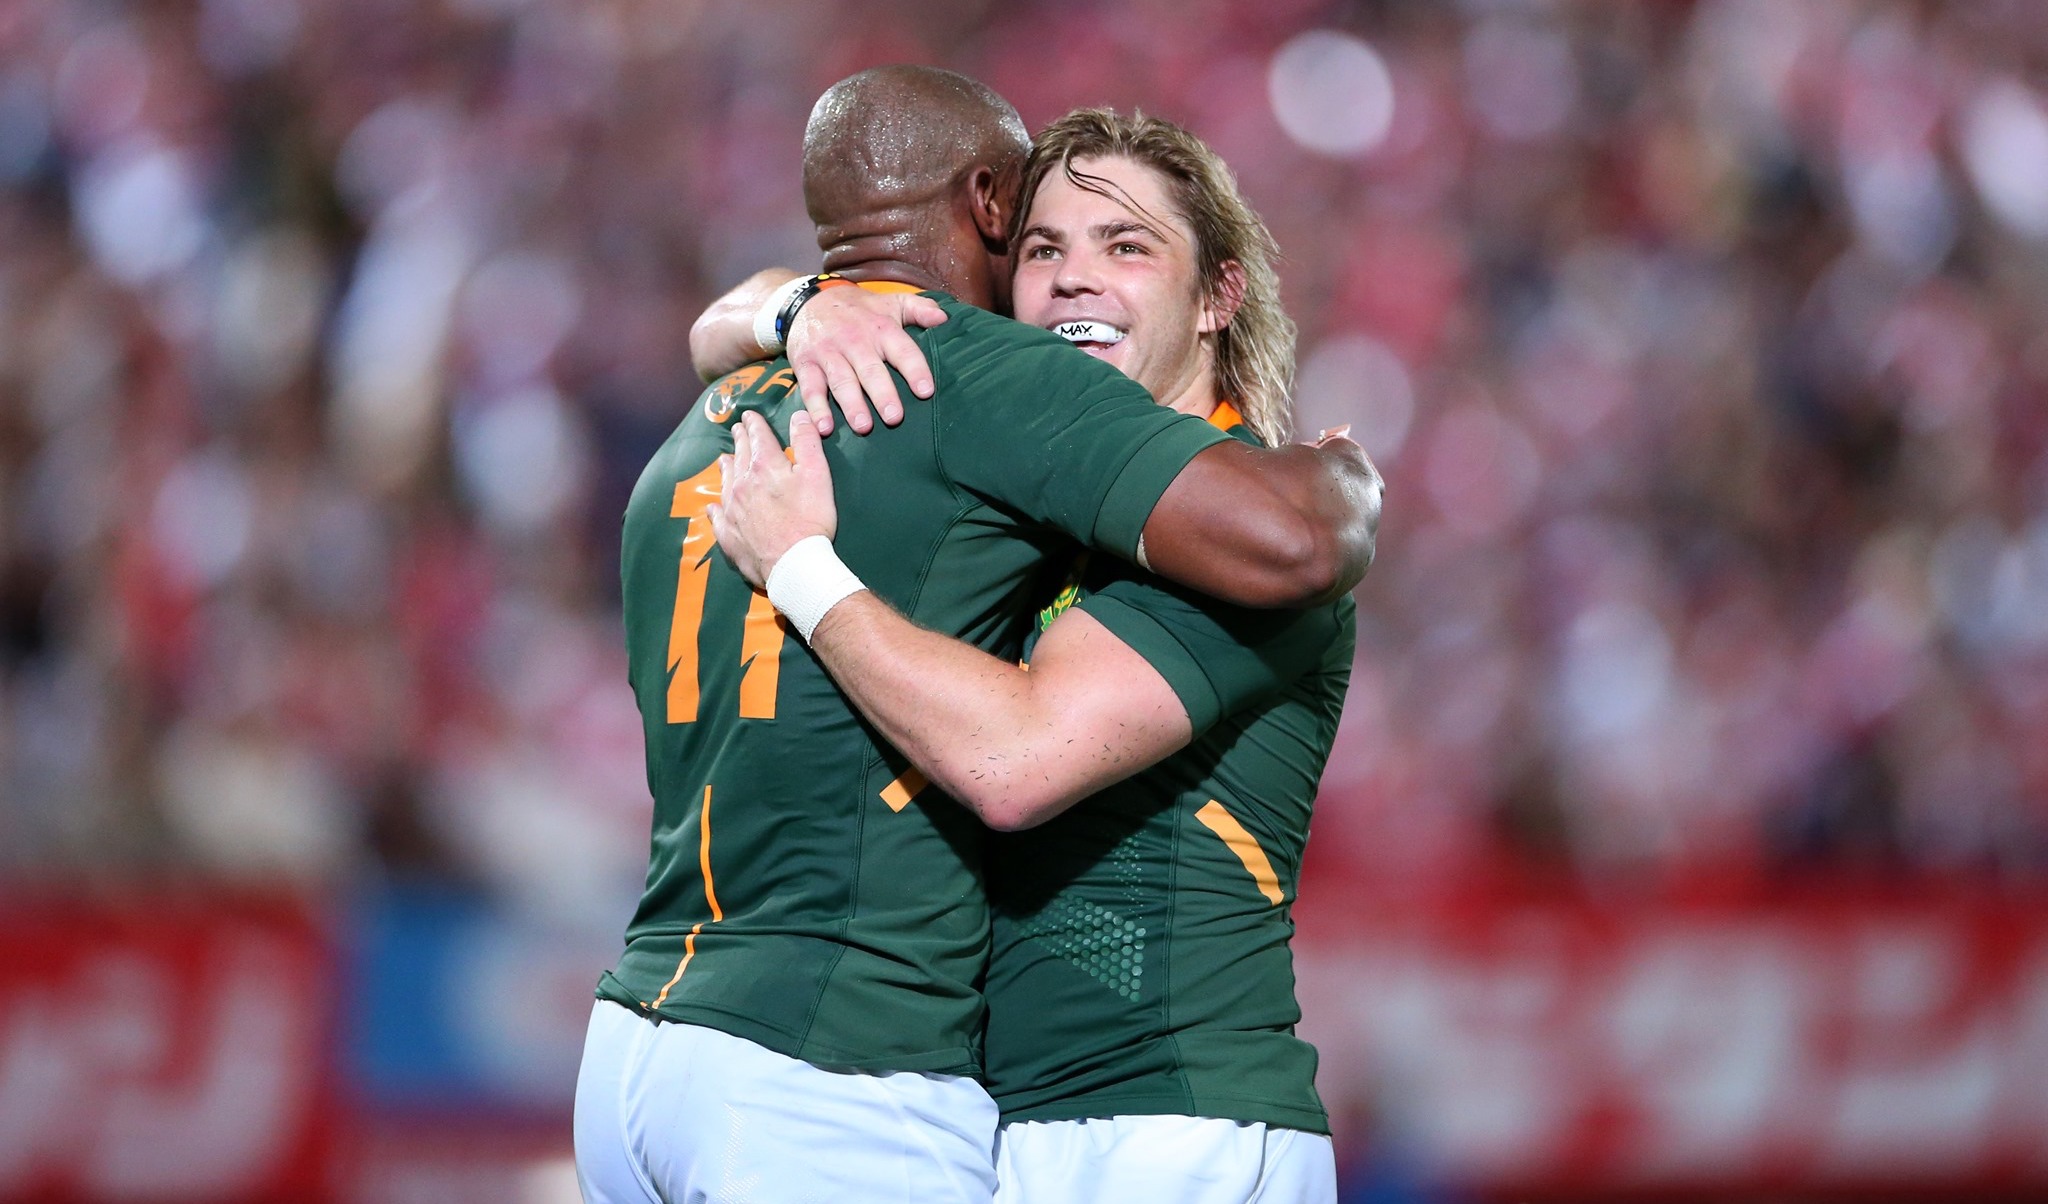 Rugby World Cup - Mike Able's Open Letter - Good Things - Springboks outclass Canada to book RWC quarter-final spot SABC